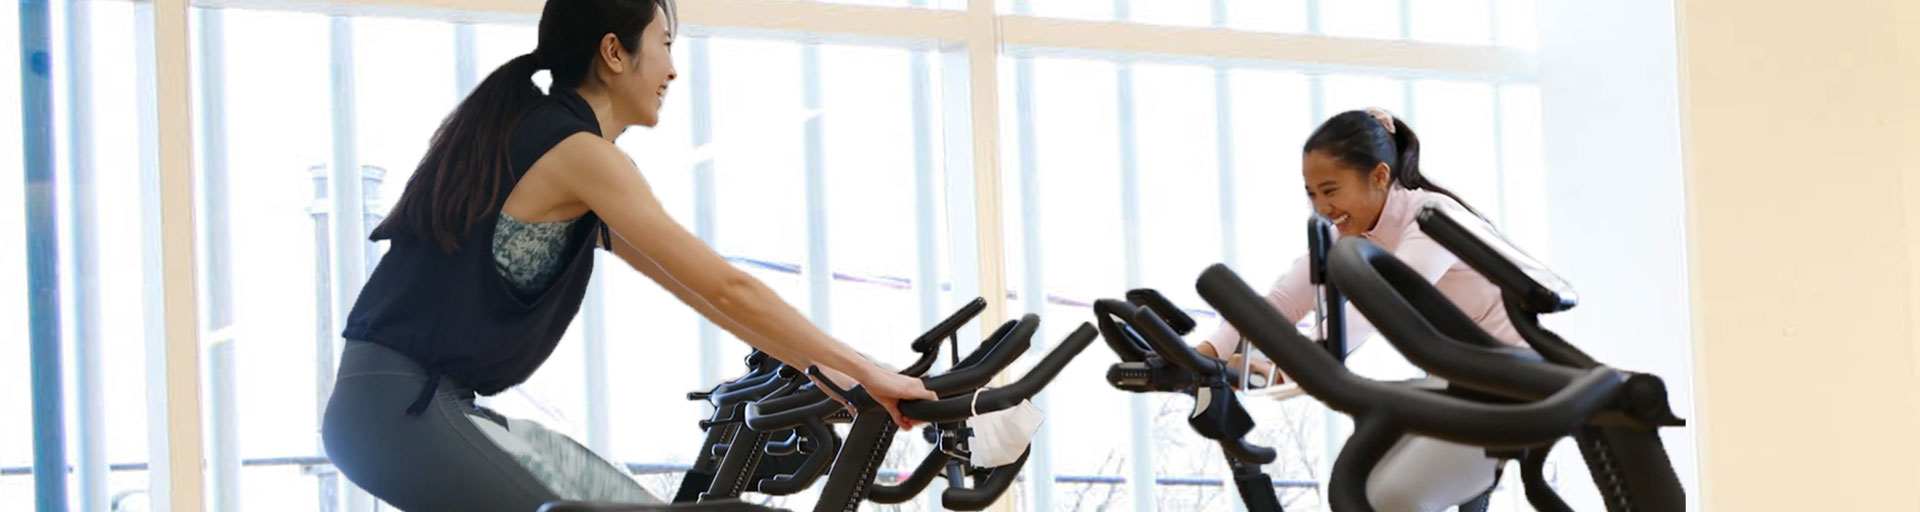 Why Gyms Need Active Aging Programs to Serve Active Older Adults - Tek  Fitness